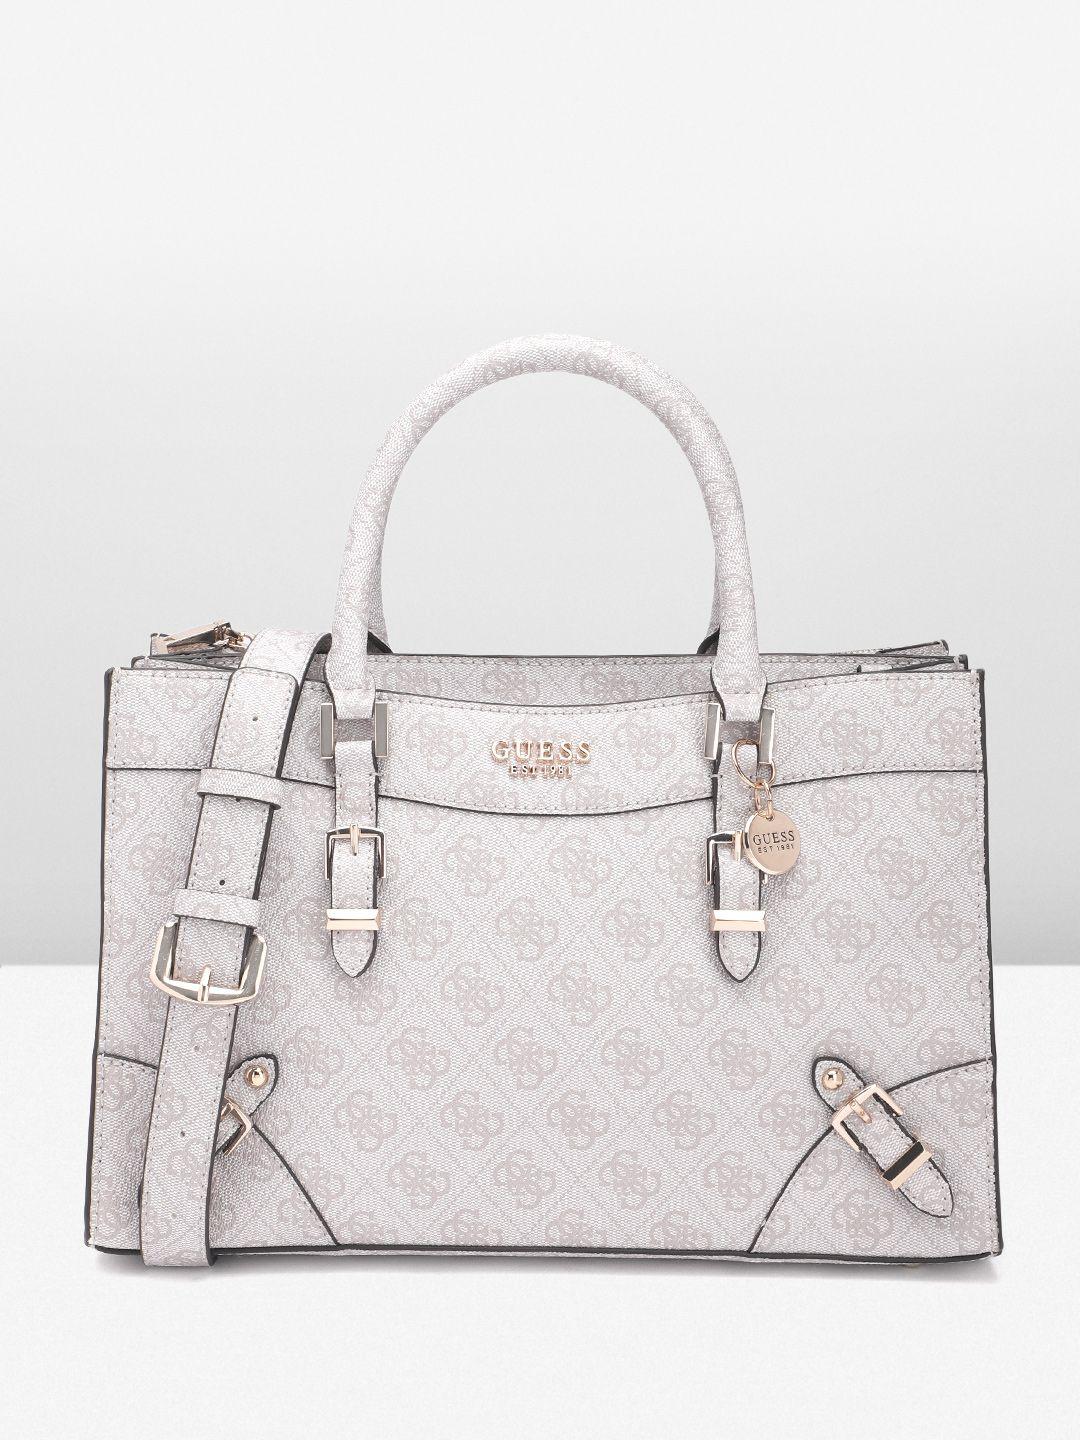 guess brand logo printed structured handheld bag with buckle detail